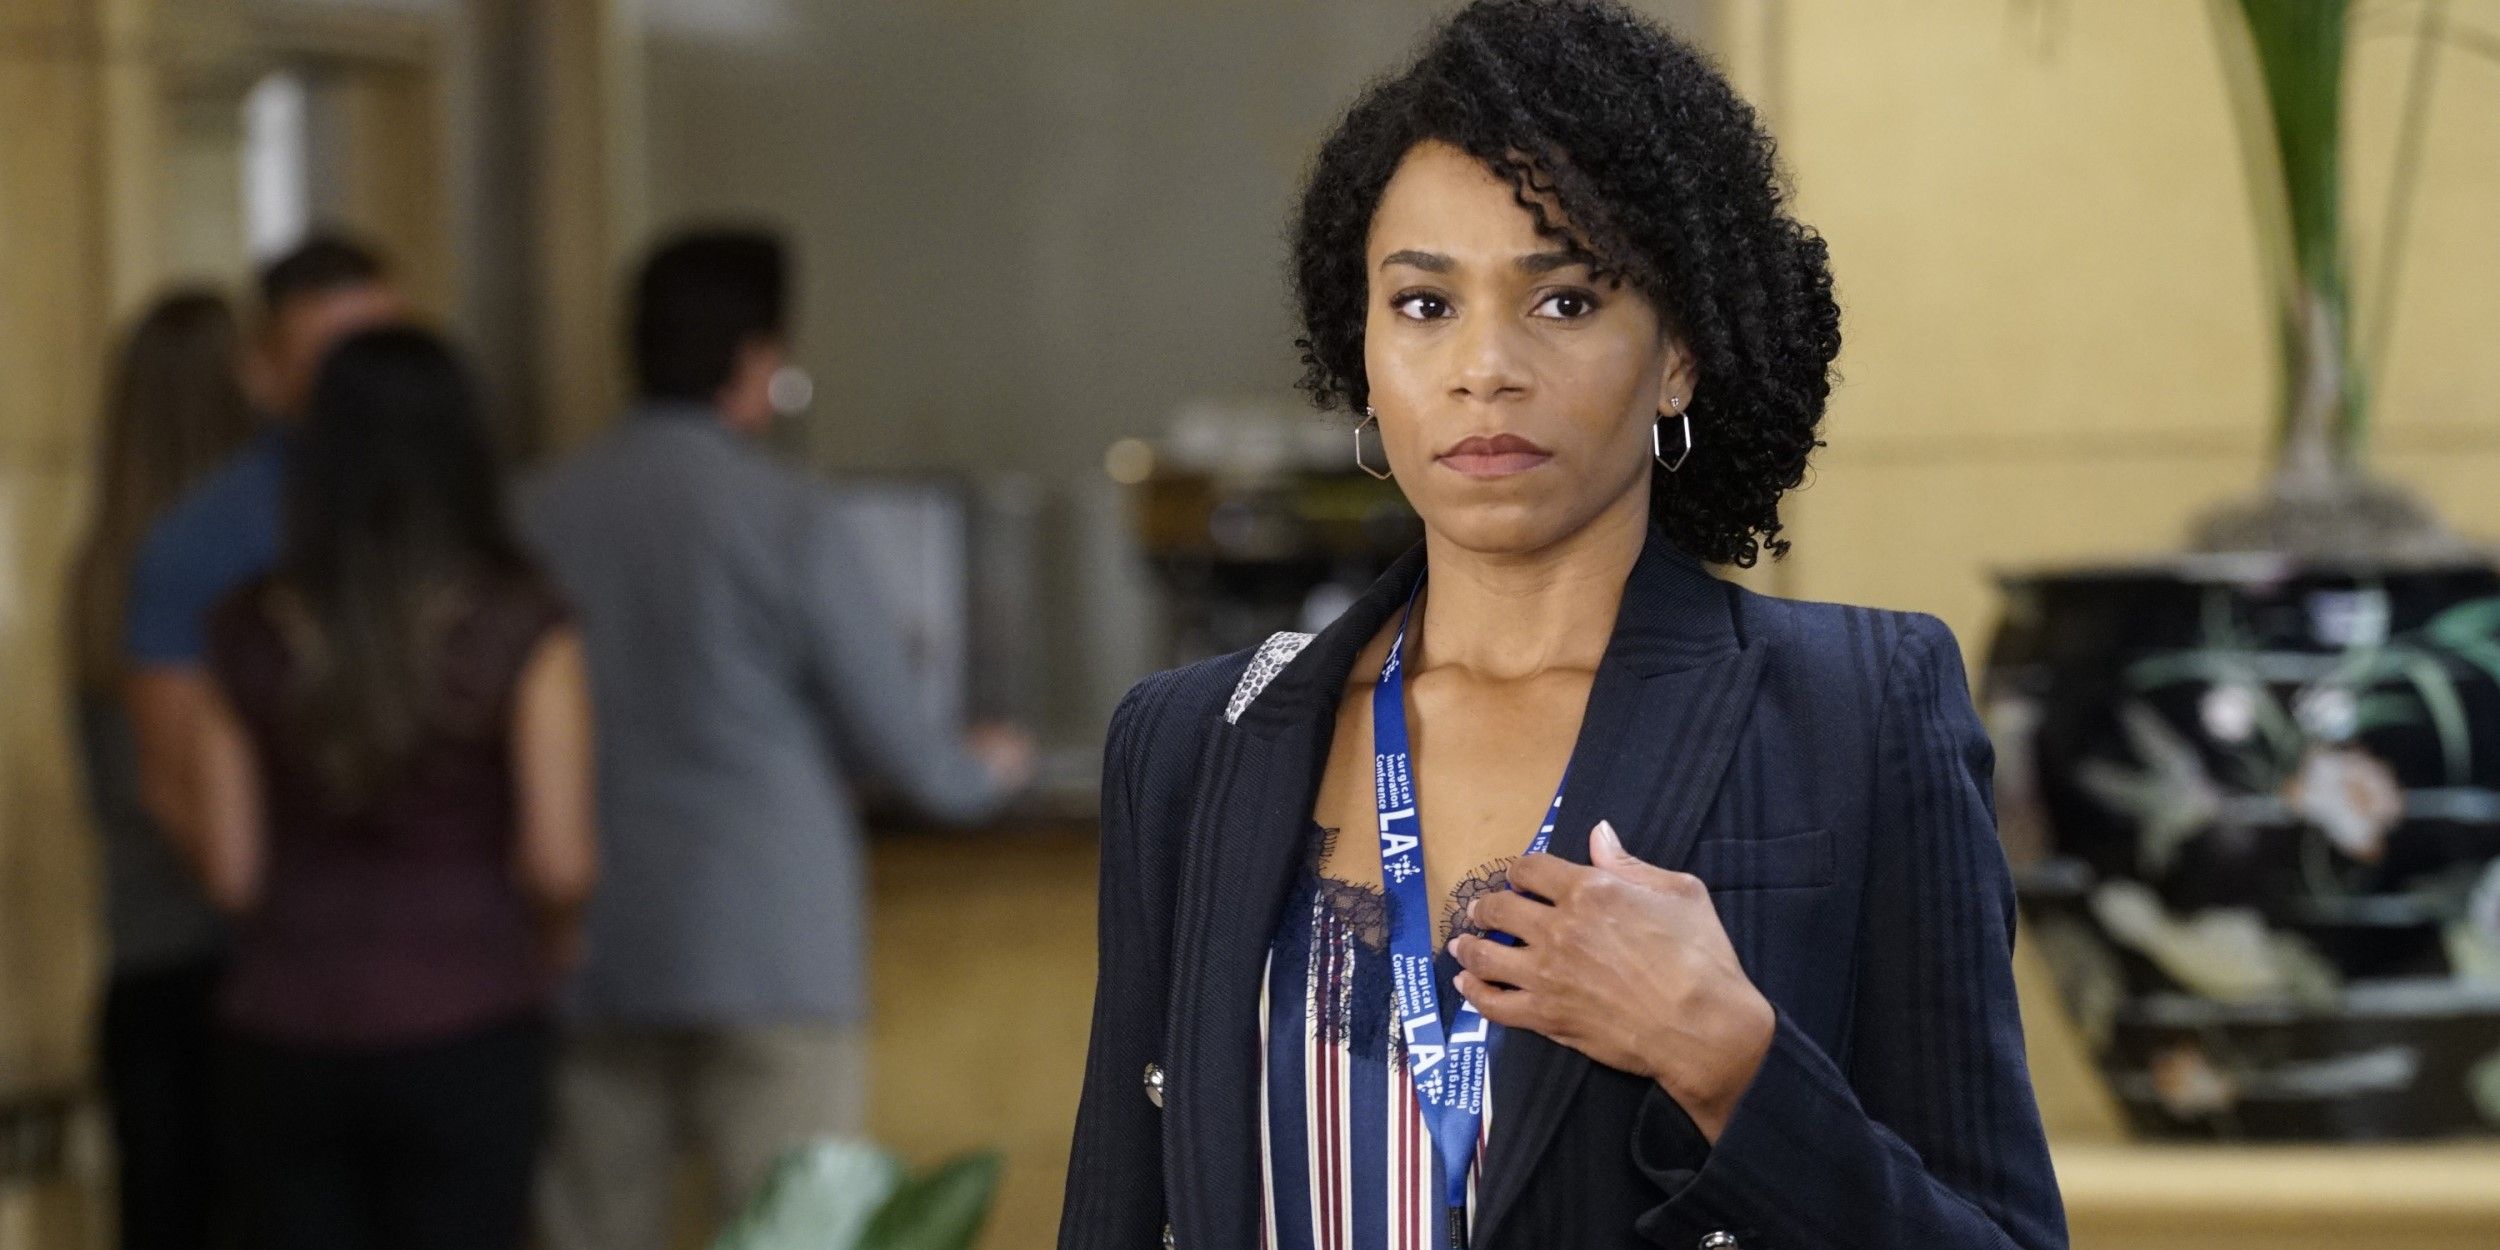 An image of Maggie Pierce at the medical conference